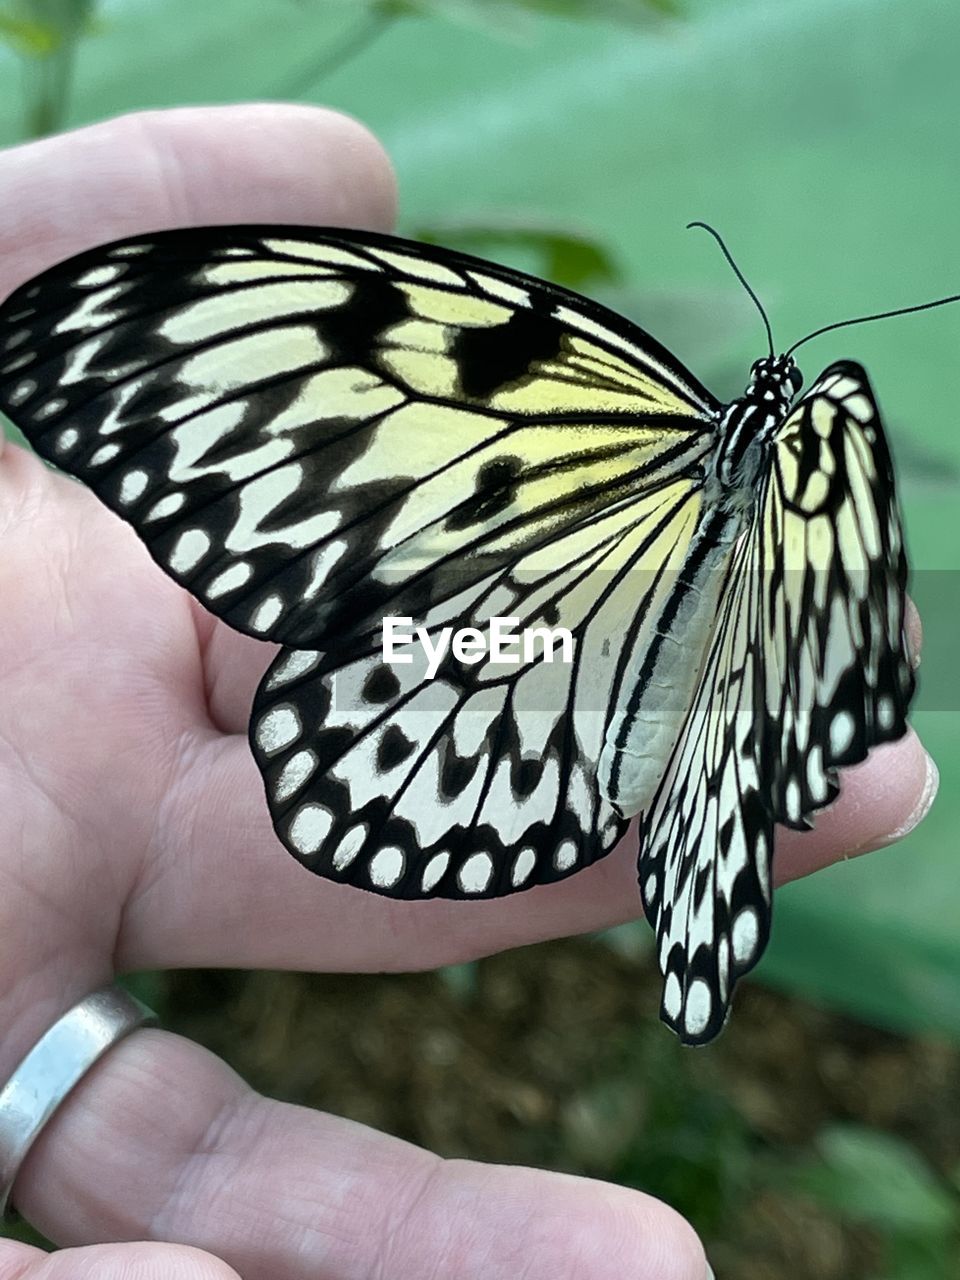 CLOSE-UP OF BUTTERFLY ON PERSON HAND HOLDING A LEAF